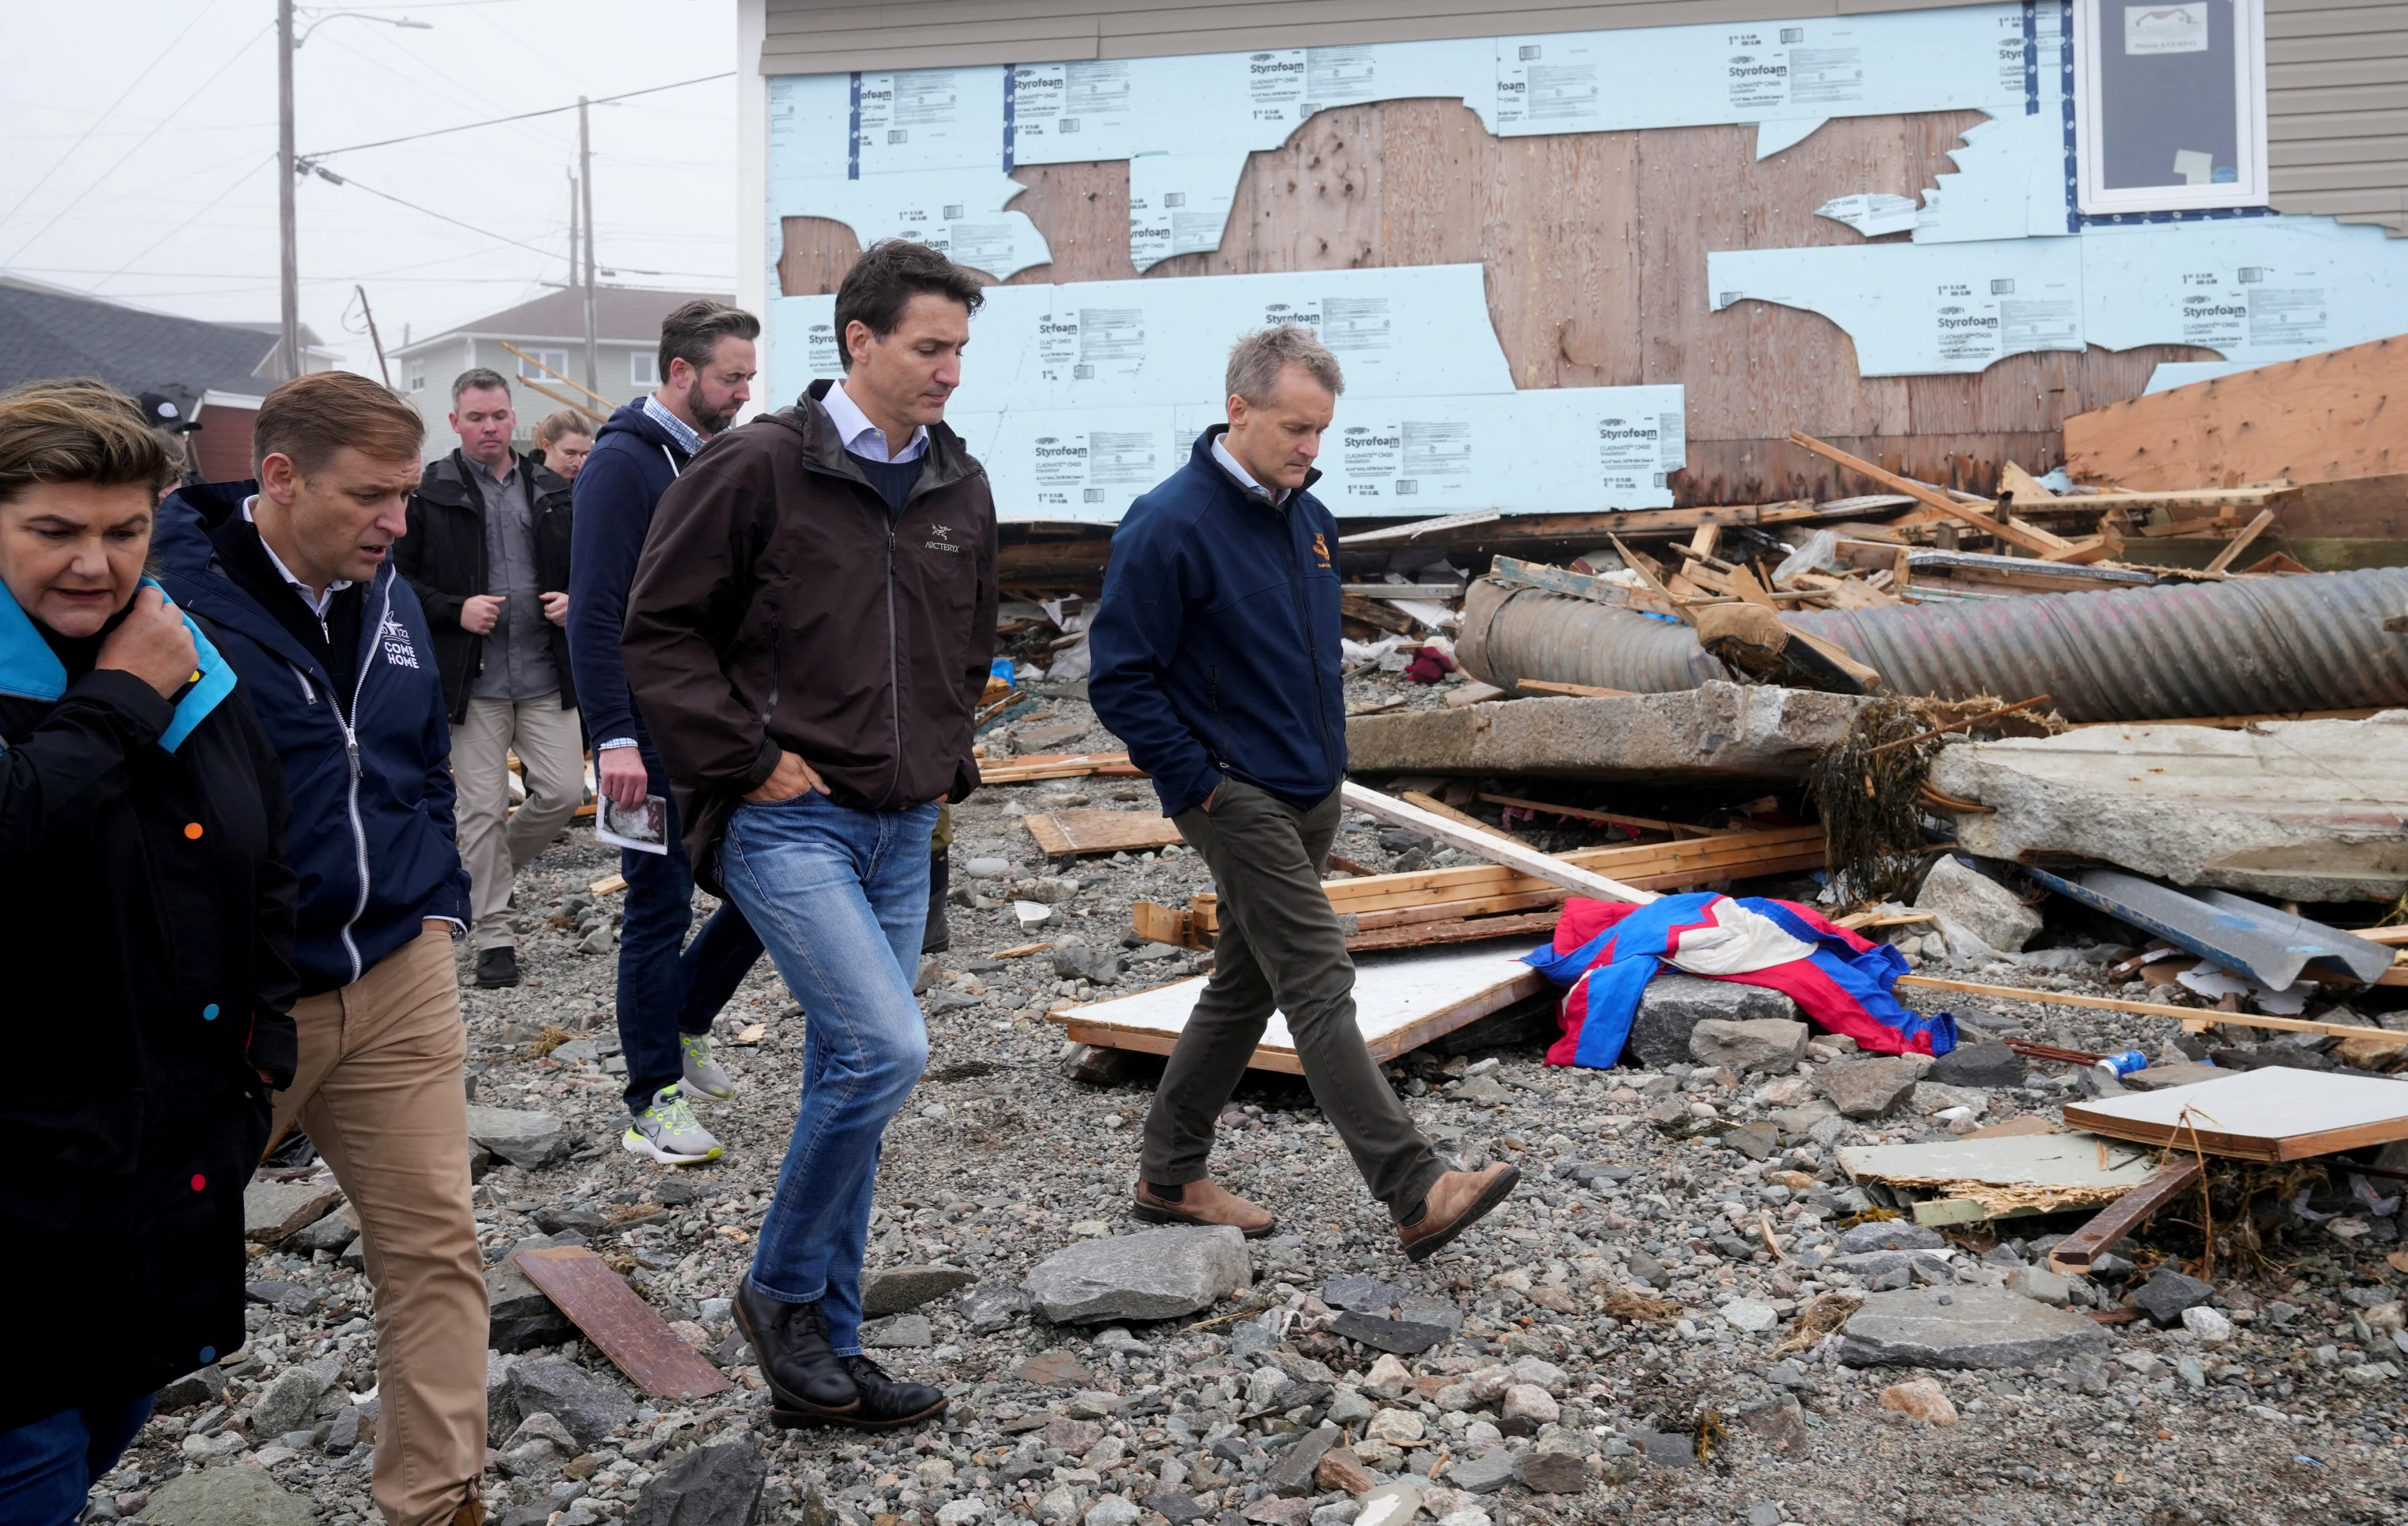 Canada's Prime Minister Justin Trudeau visits the damage area caused by Hurricane Fiona in Port Aux Basques, Newfoundland, Canada September 28, 2022. (REUTERS/John Morris)